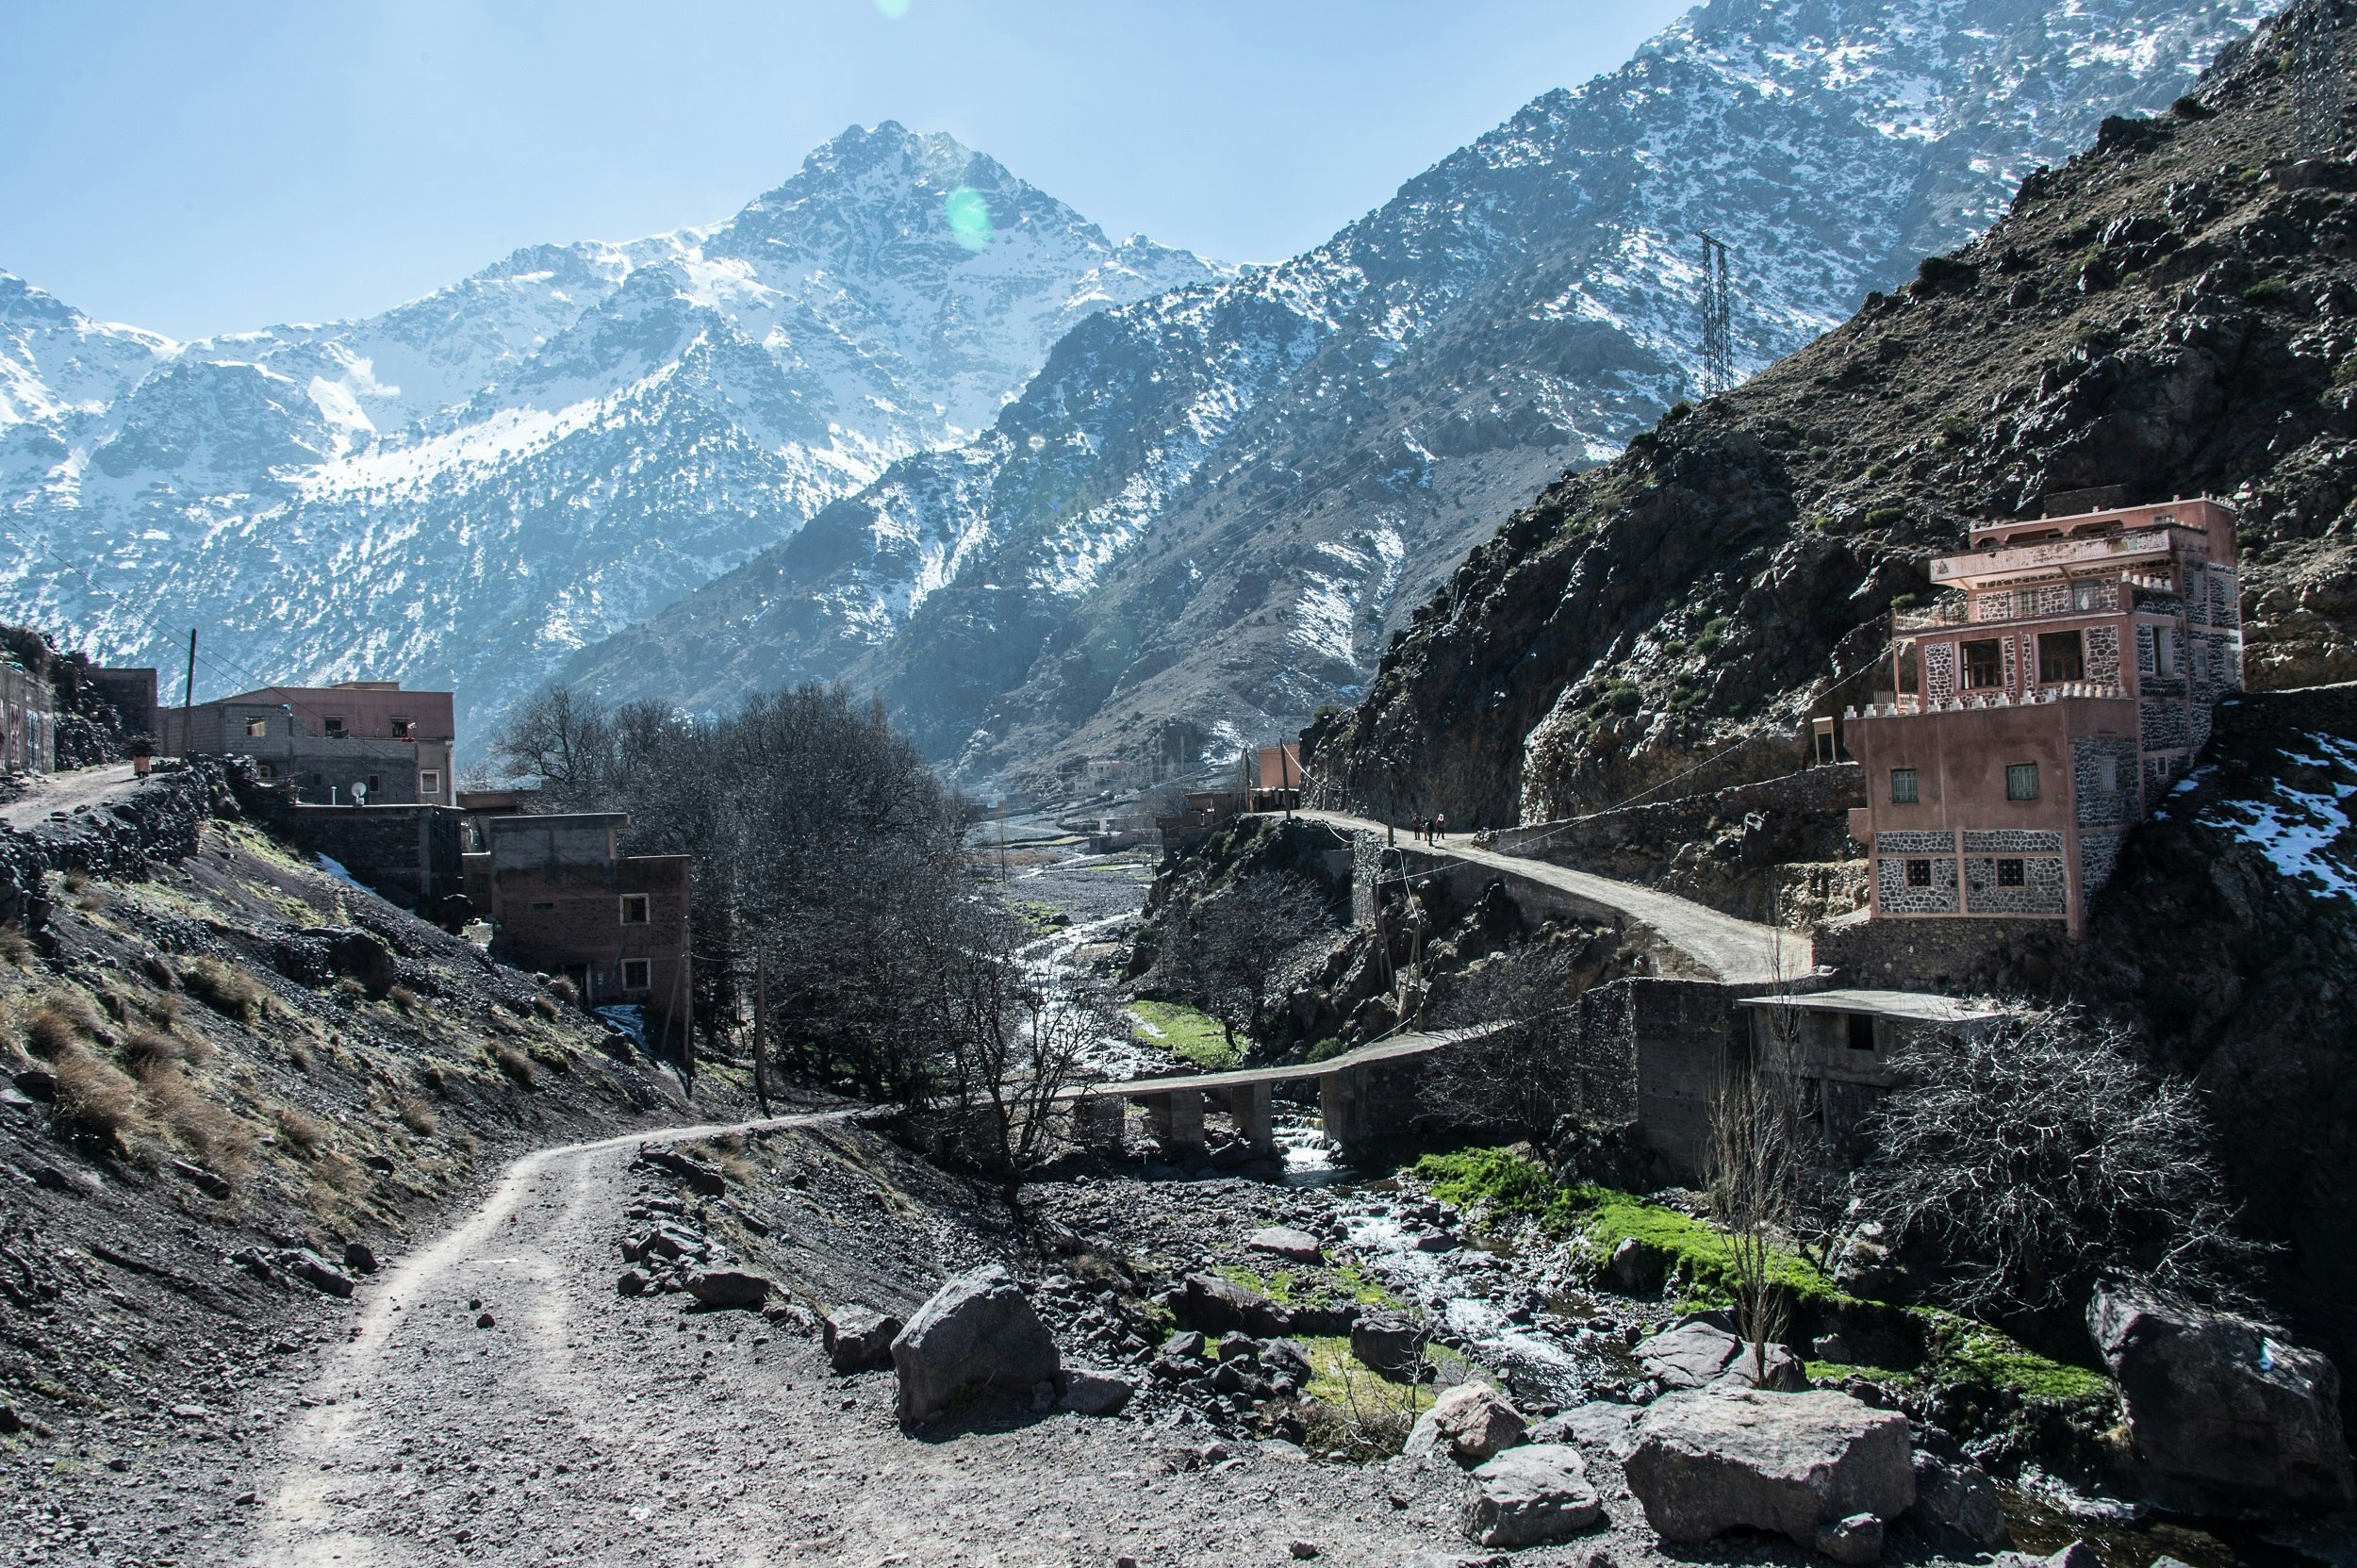 A walking path ascends along the side of a valley towards the distant (and towering) peak of Jebel Toubkal; some small dwellings sit beside the path on the steep hillside.